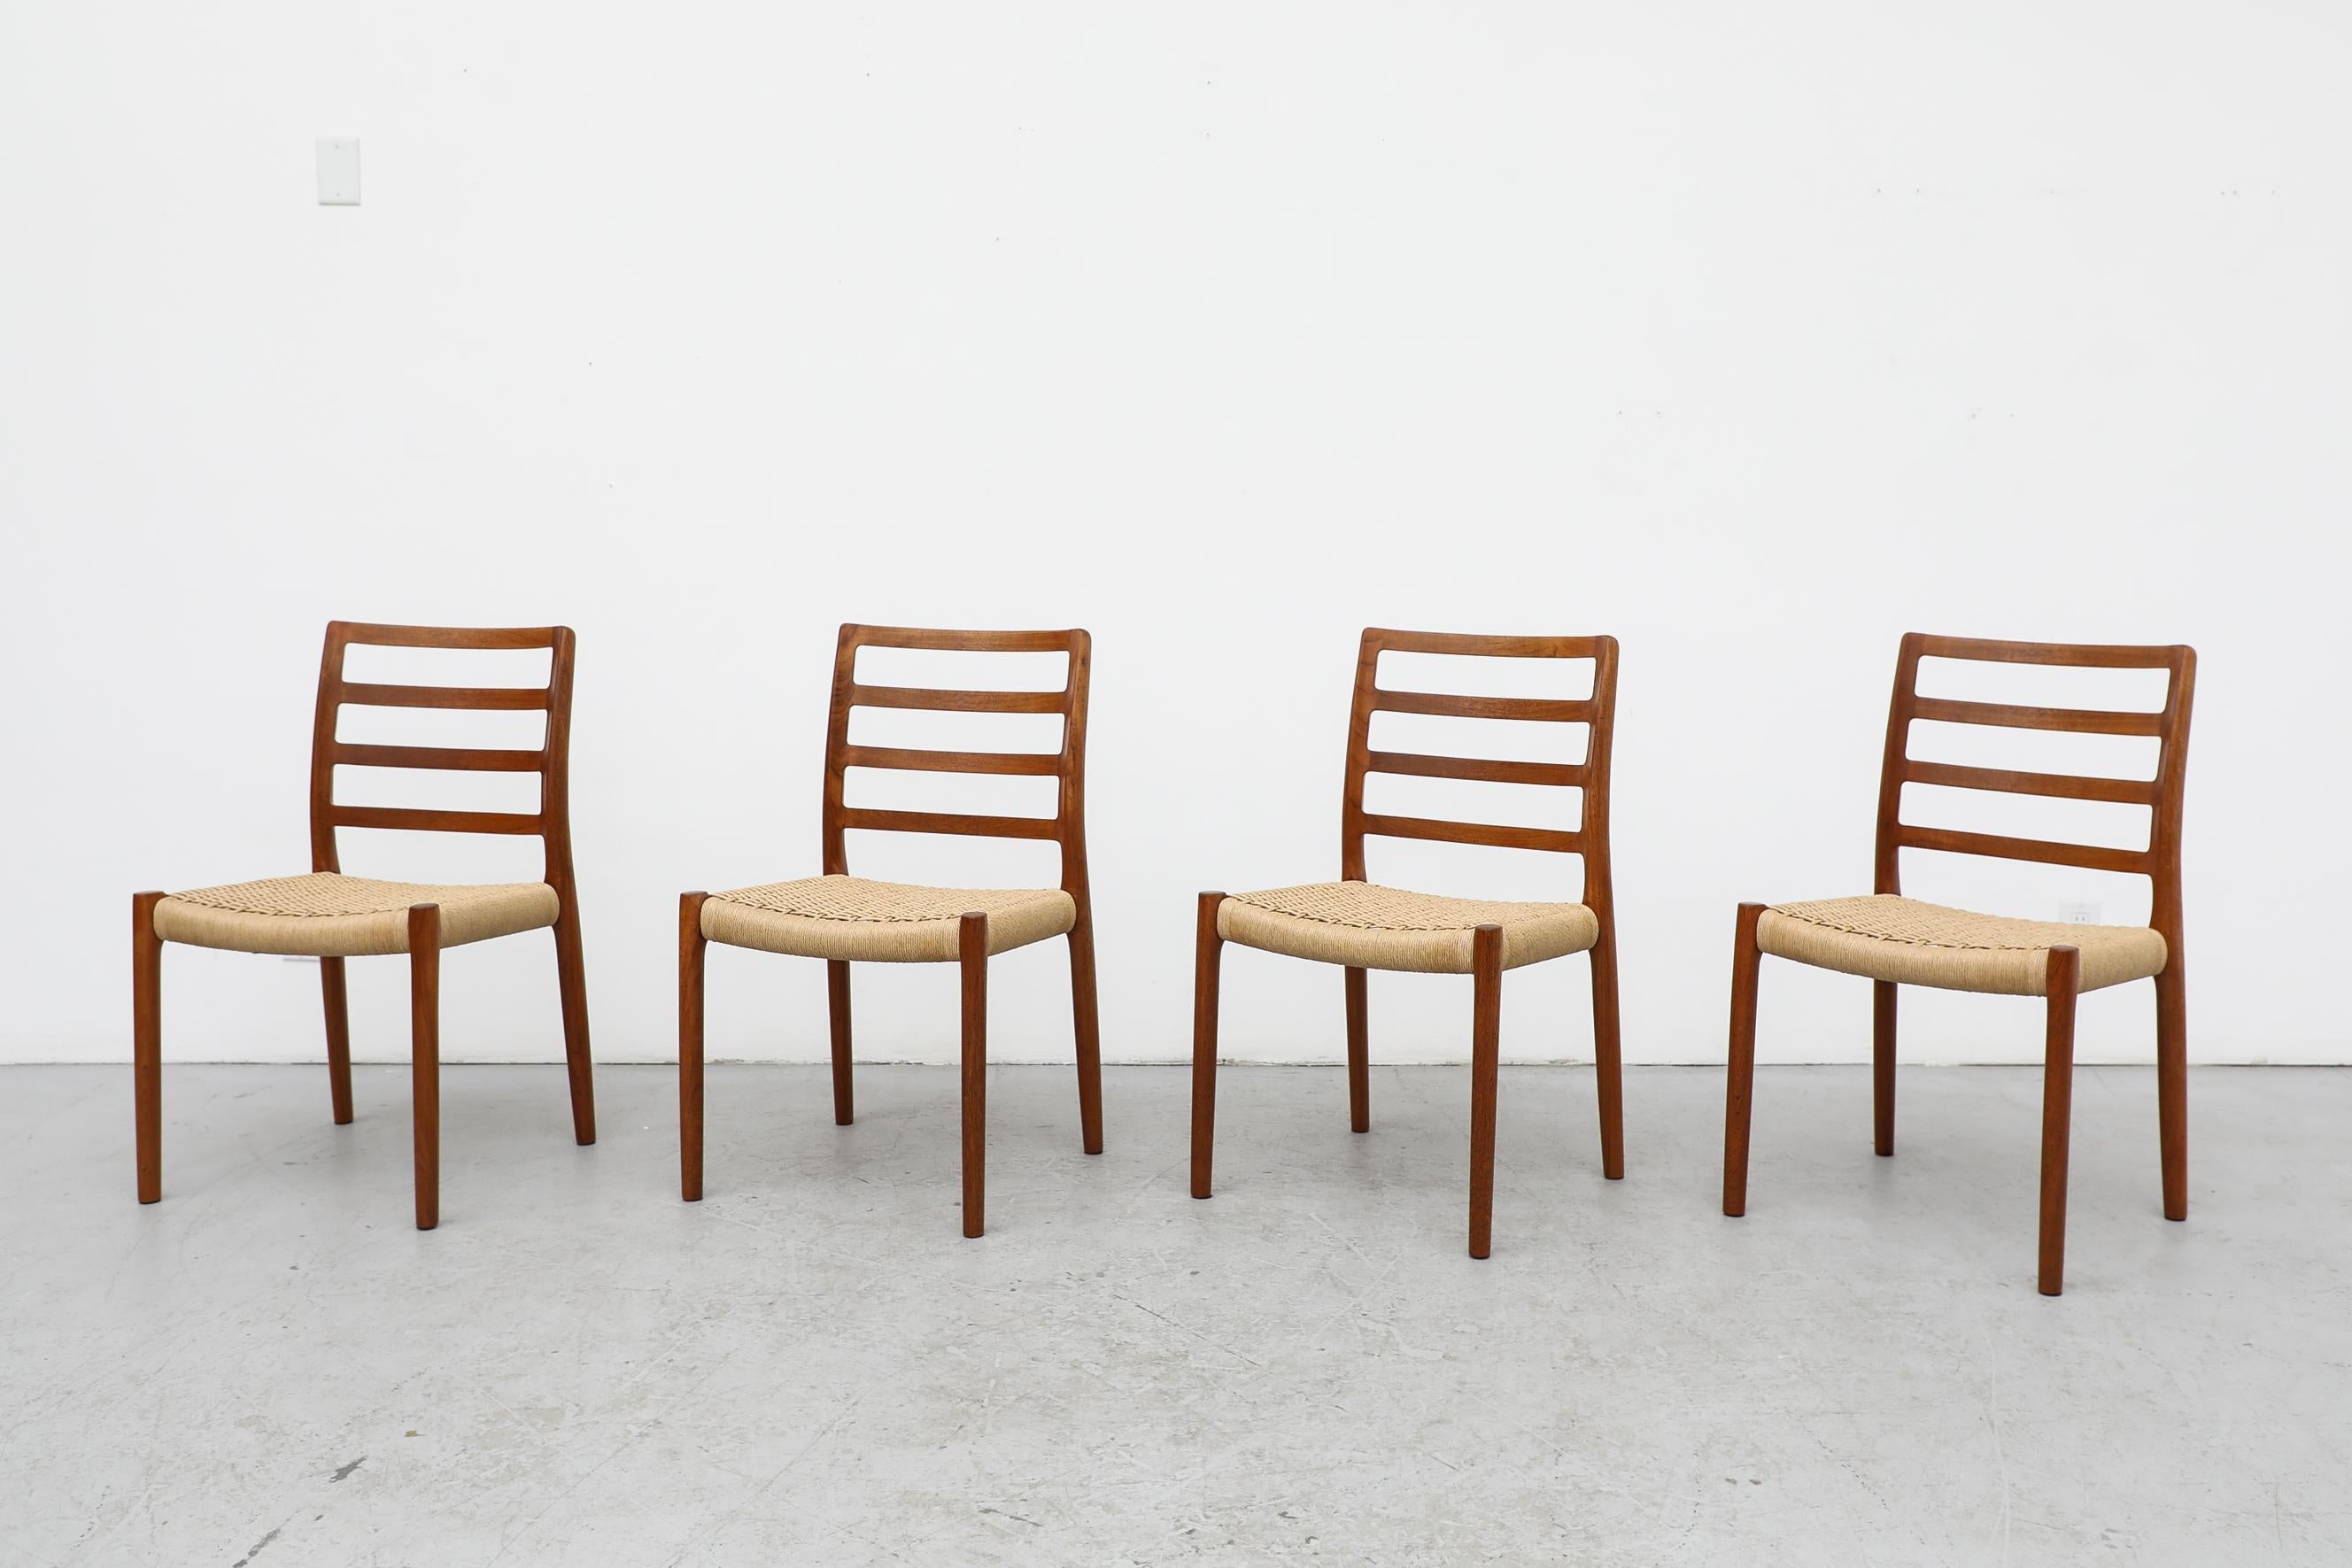 Set of 4 Classic Mid-Century teak ladder back and paper cord dining chairs designed by Niels Moller for J.L.Moller. In original condition with normal signs of wear consistent with their age and use.